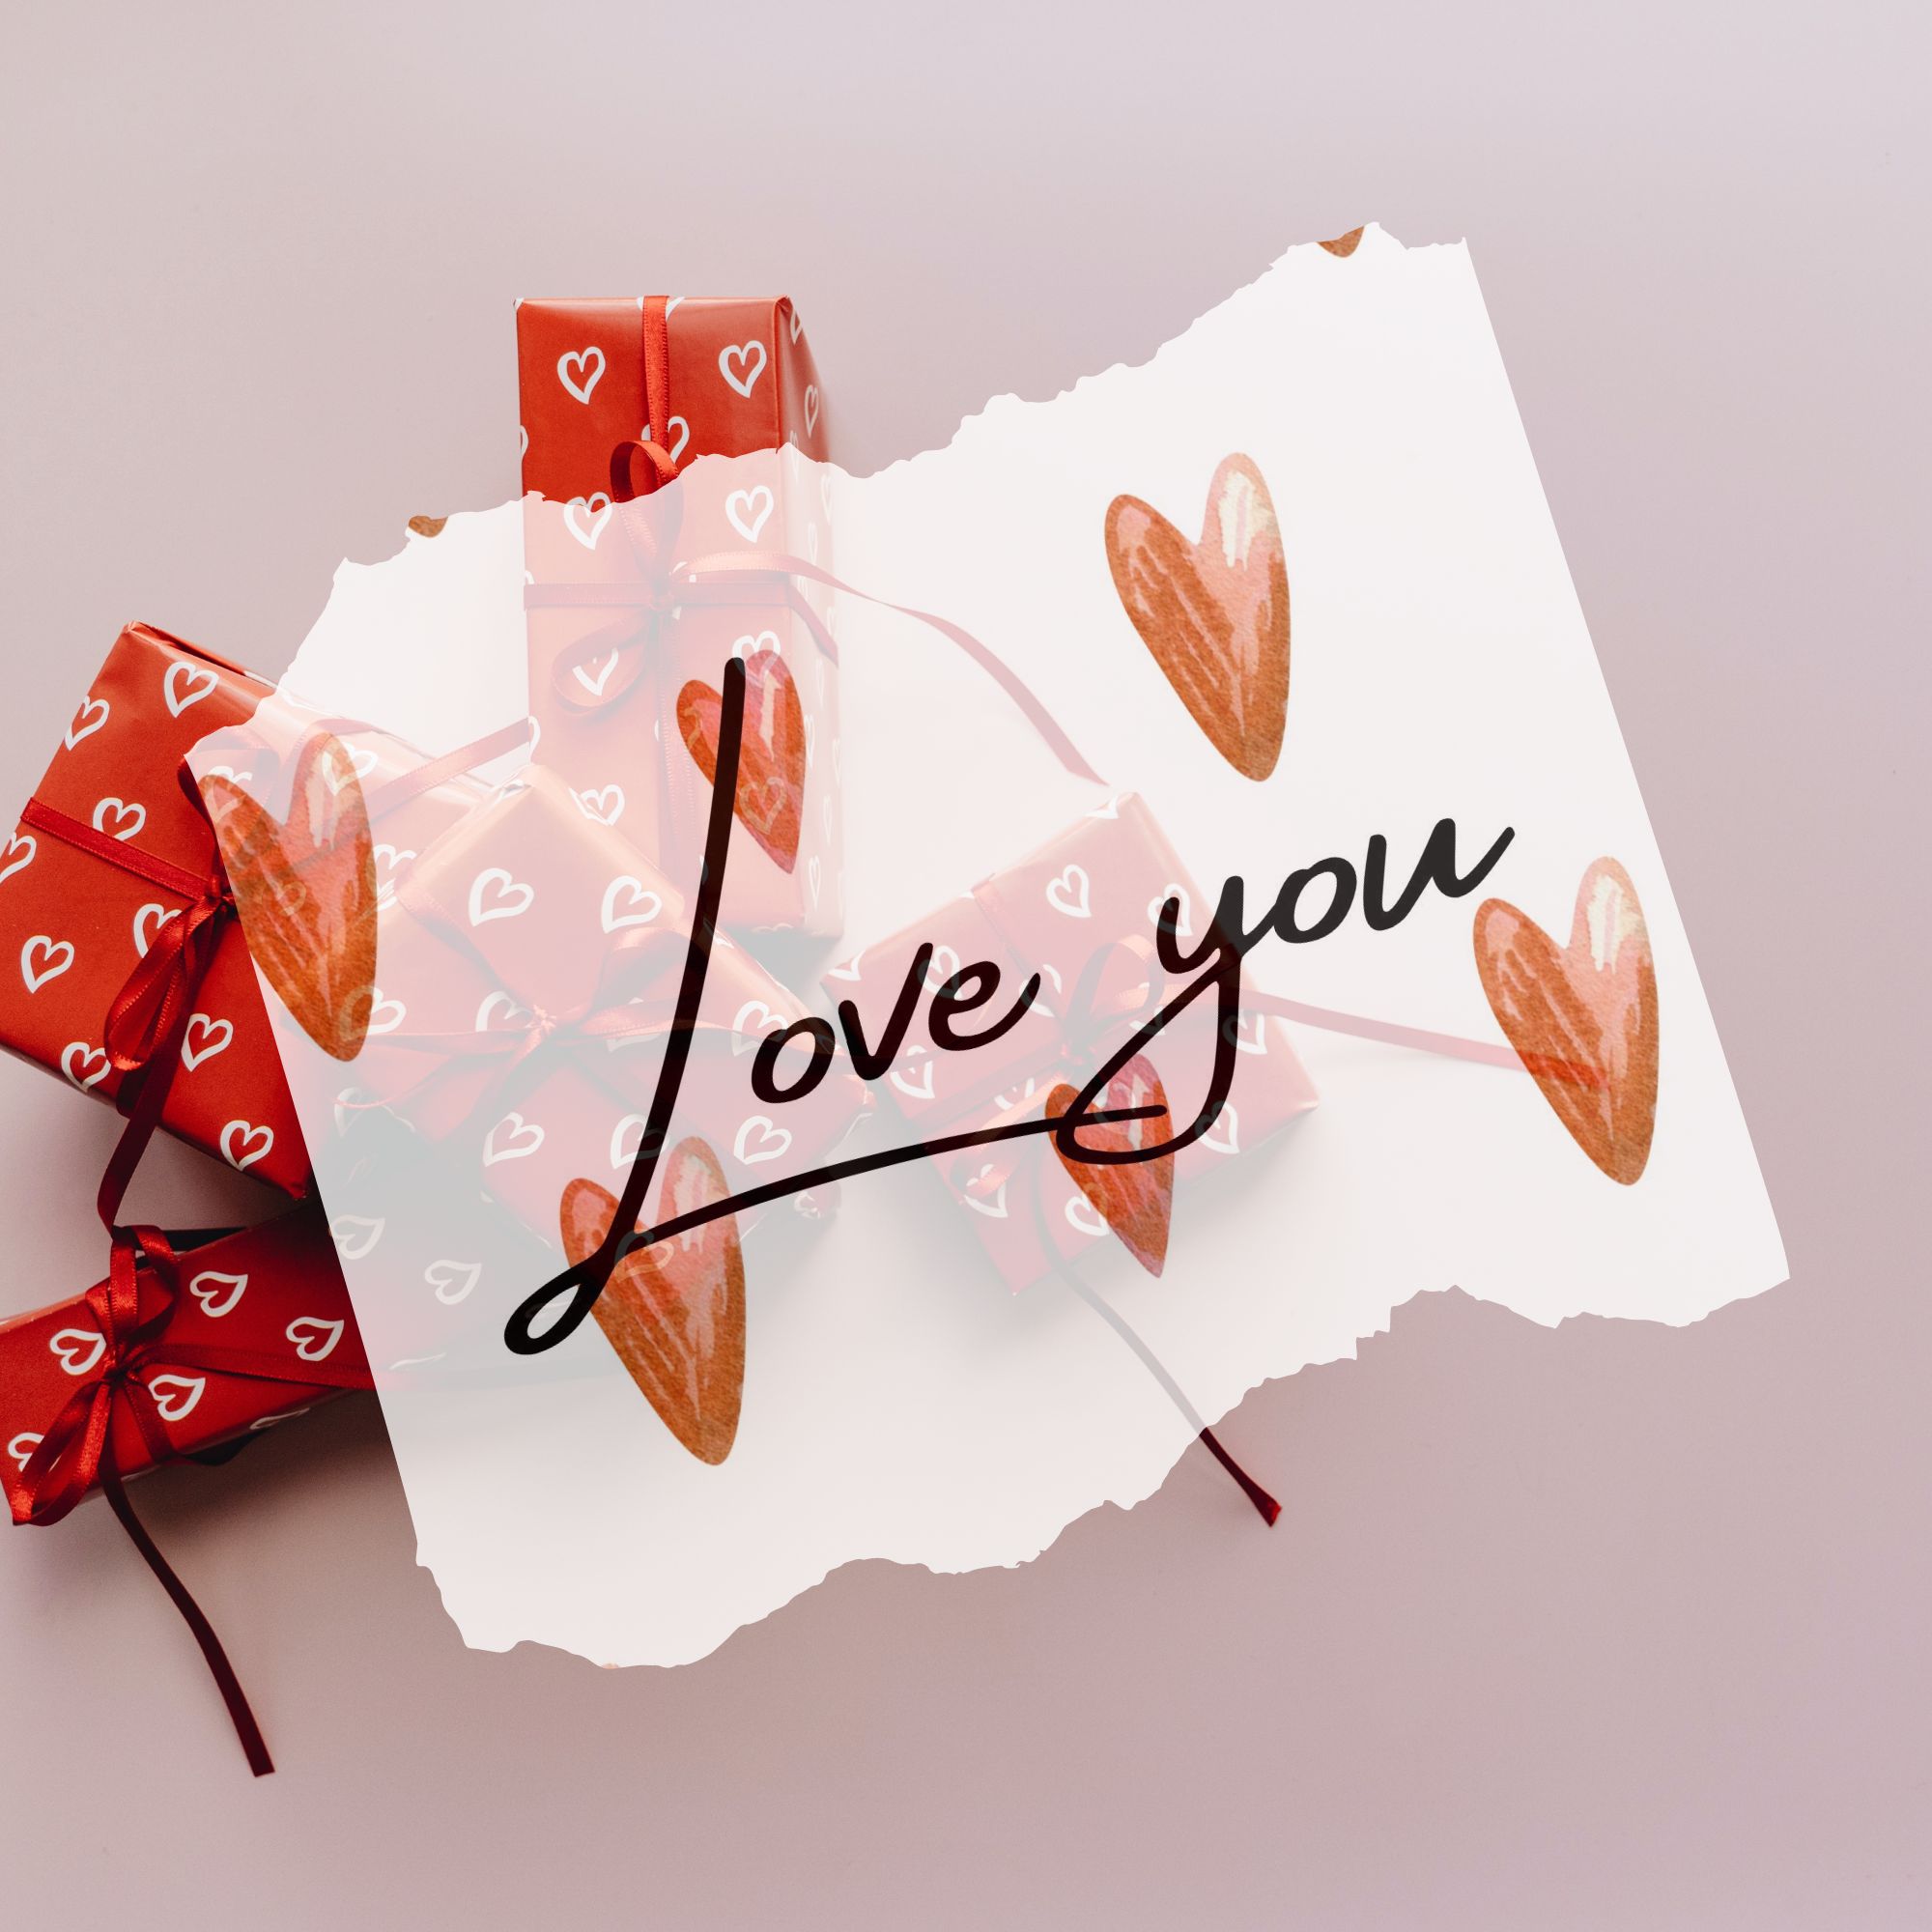 Love You Valentine's Day Wall Art image preview.